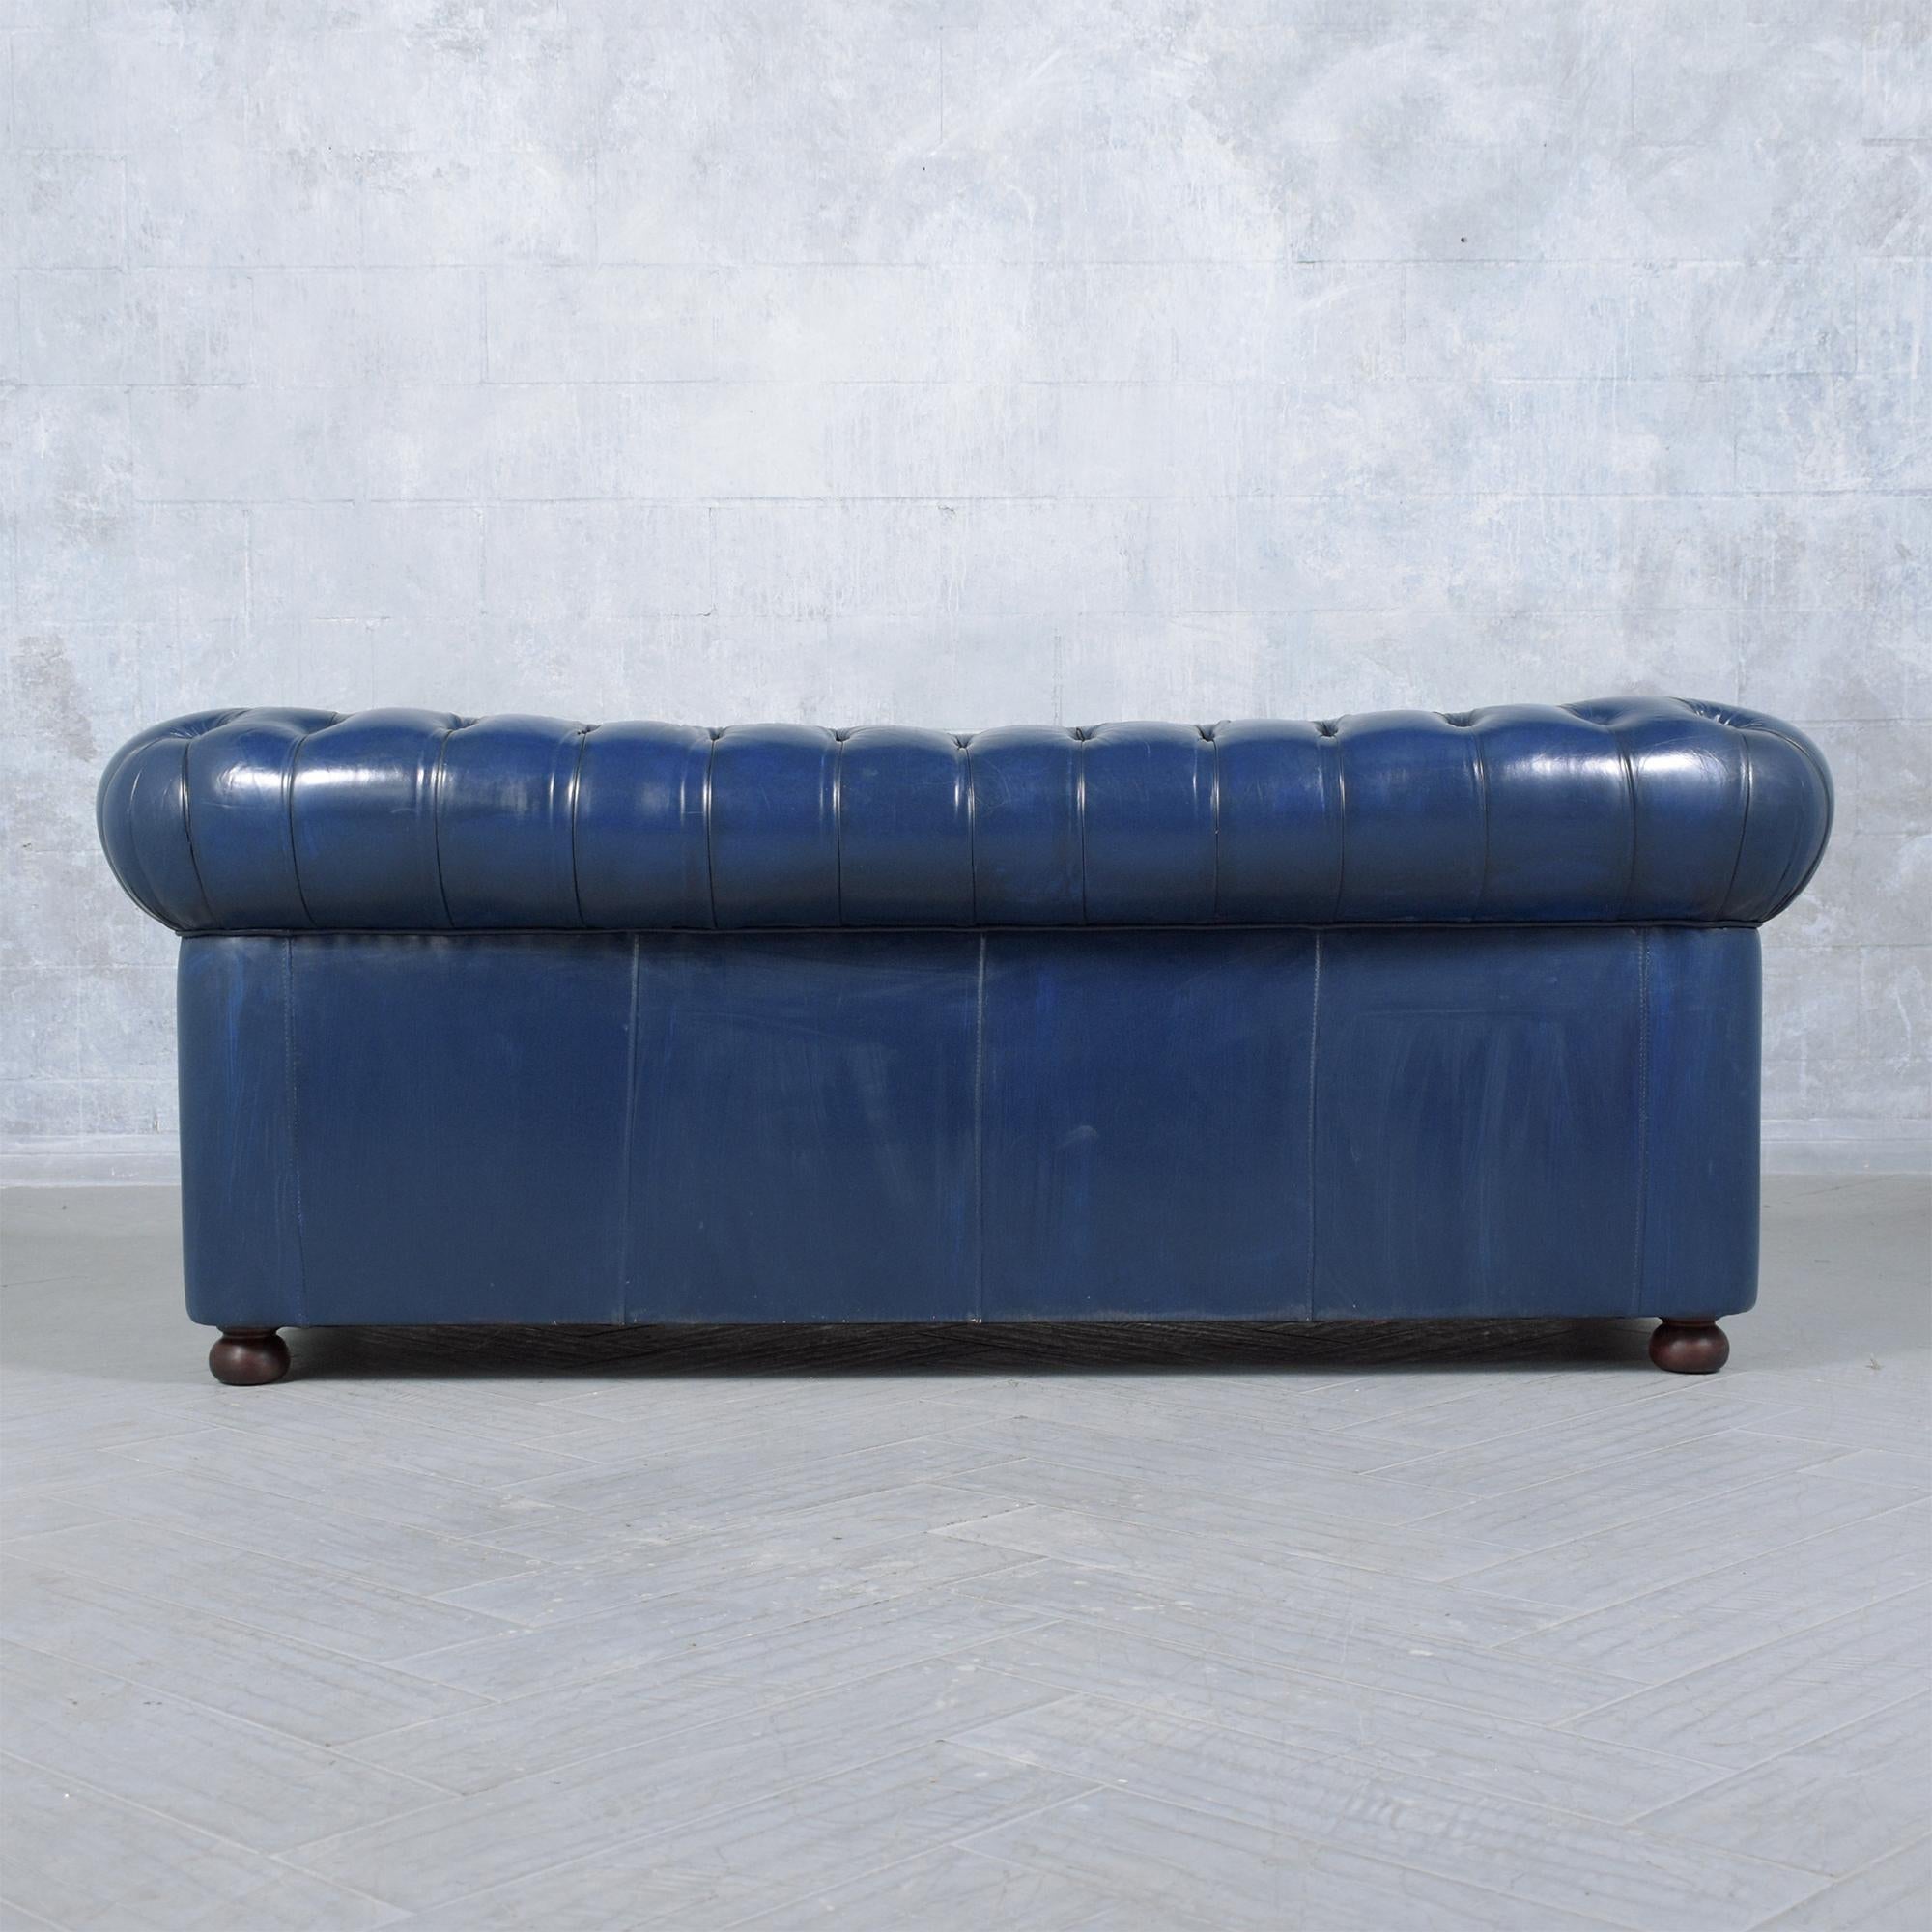 Restored Vintage Chesterfield Sofa in Distressed Navy Leather For Sale 3